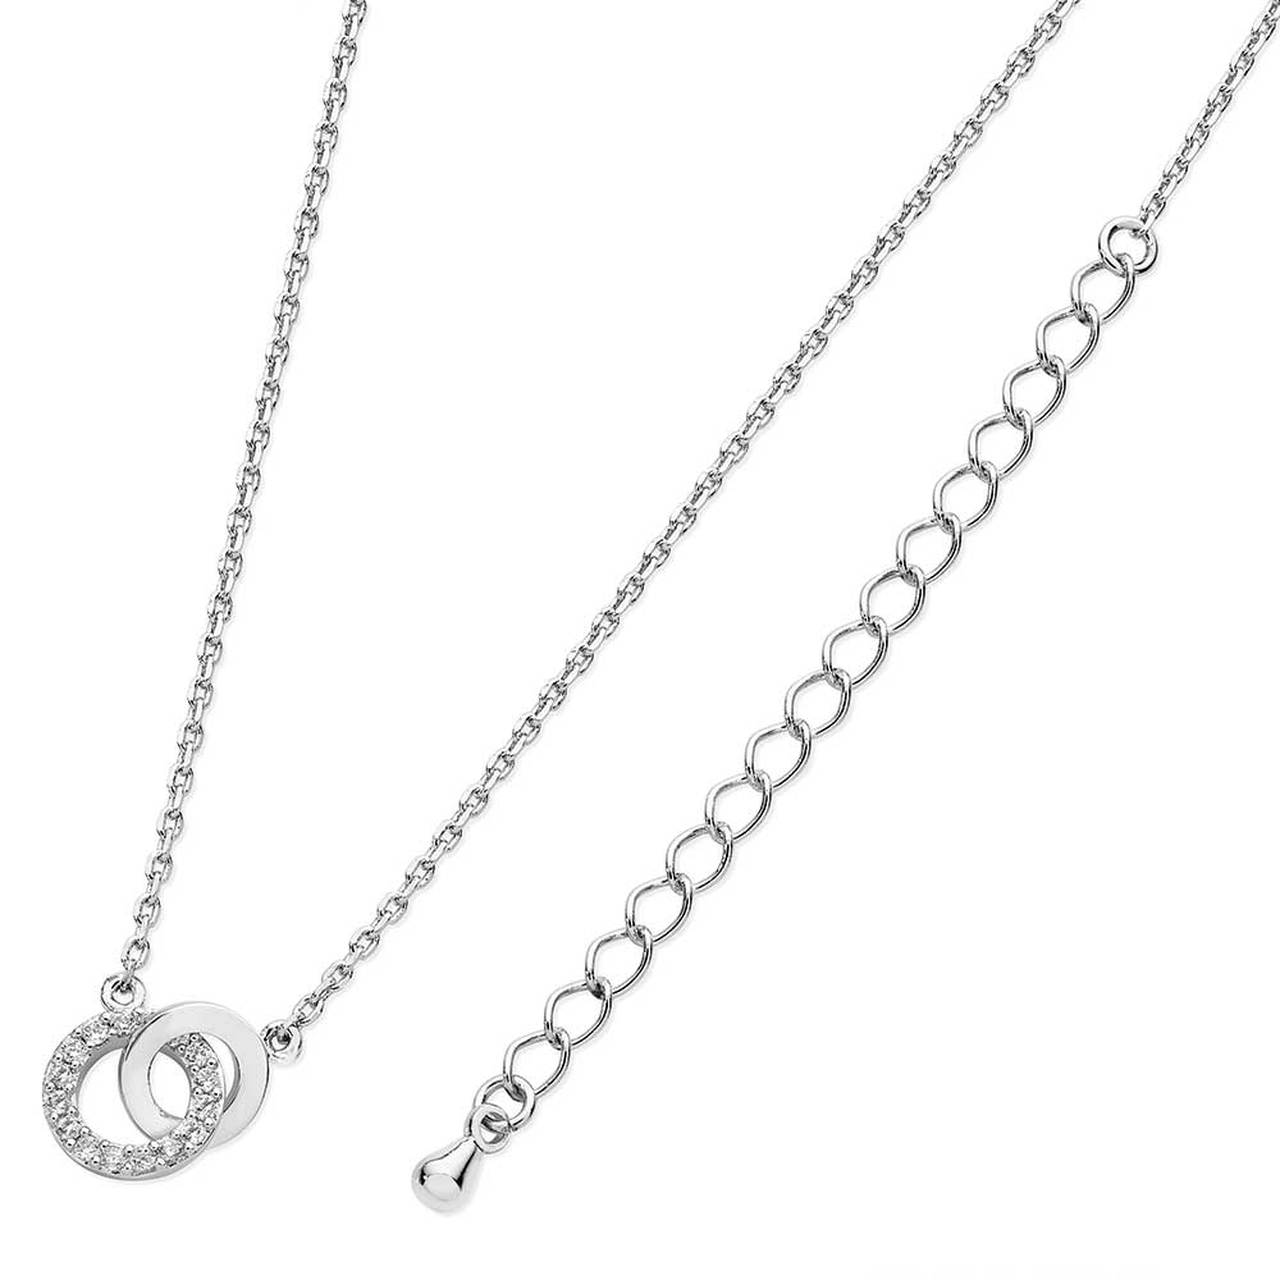 Forever sparkling, this symbolic necklace is a glistening symbol of forever love. Fashioned in cool silver the design joins one polished open circle with a larger open circle lined with brilliantly cut round clear crystals. A thoughtful gift for the one you love, this dazzling duo is buffed to a brilliant lustre and suspends centered along a cable chain that secures with a lobster claw clasp.